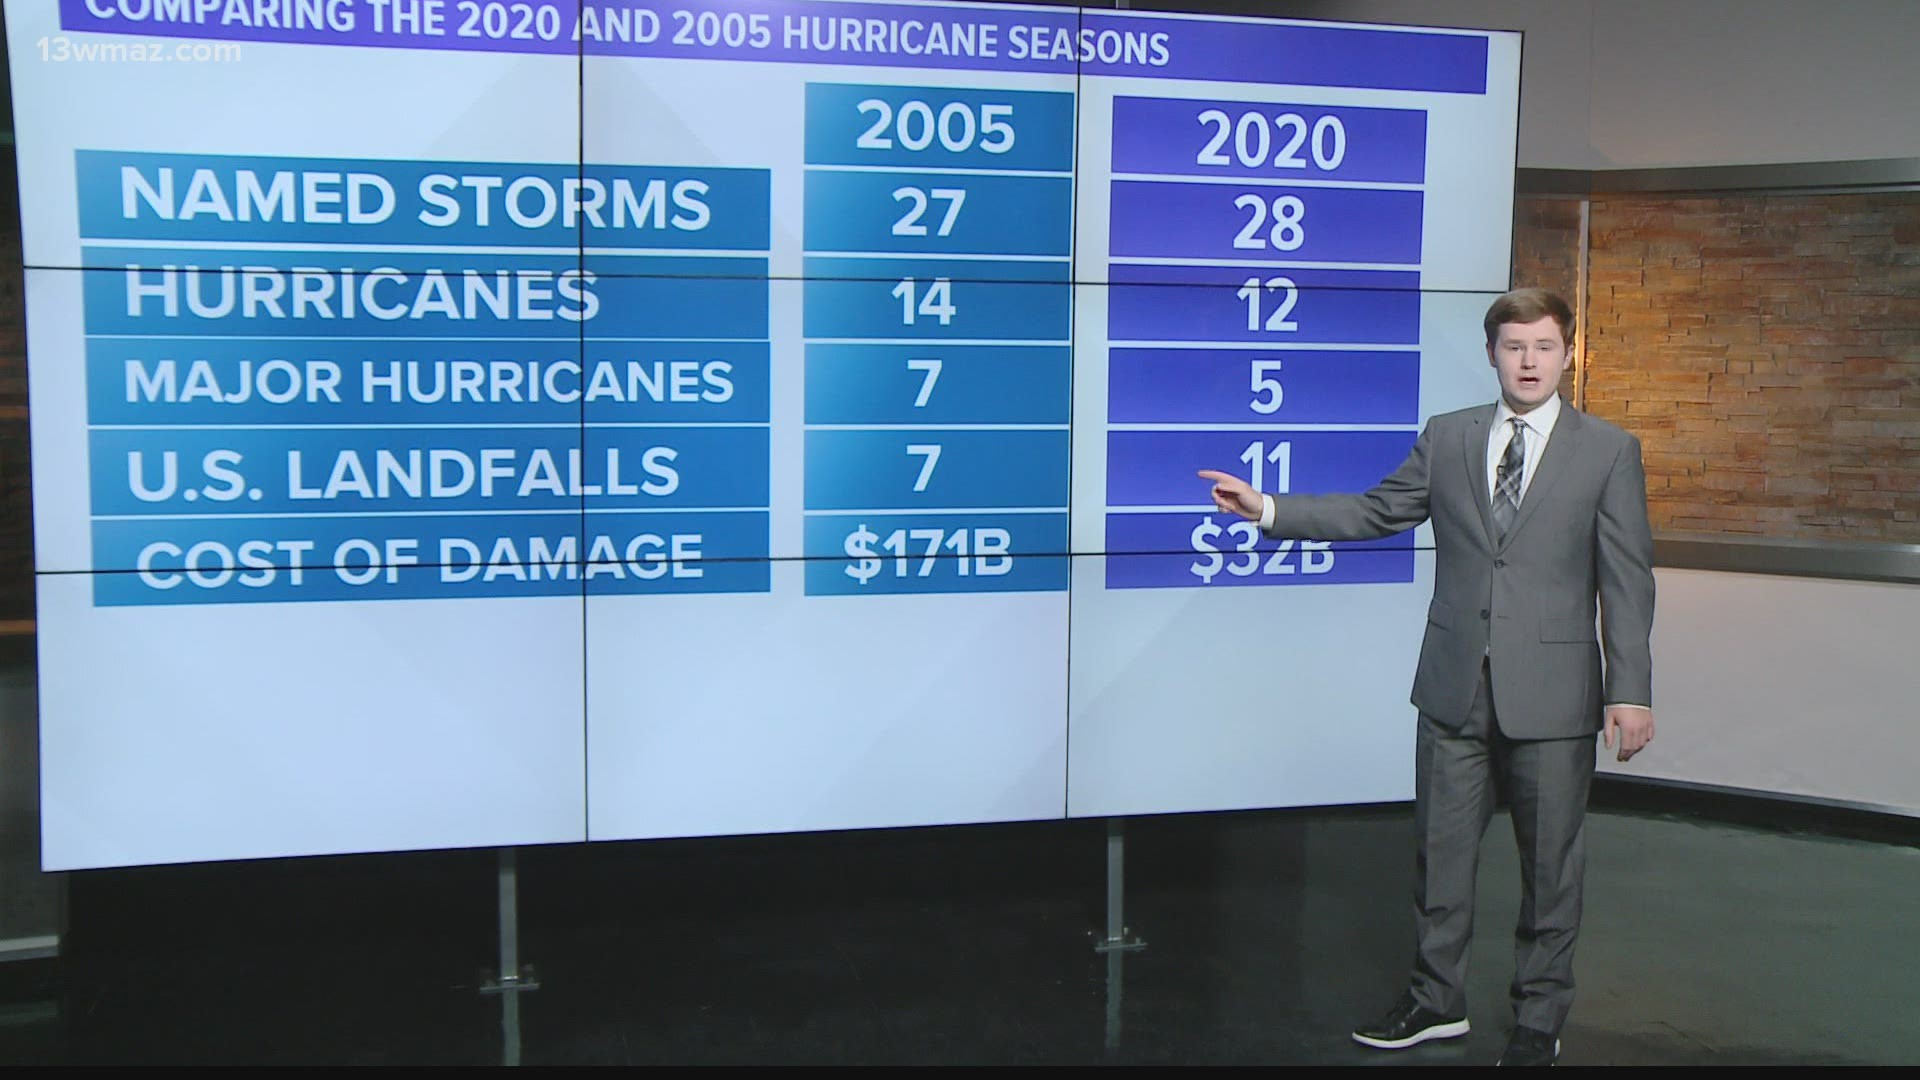 Right now, we have Eta in the Caribbean and we've seen an incredible number of named storms this year, but 2020 doesn't stack up to 2005 in some categories.